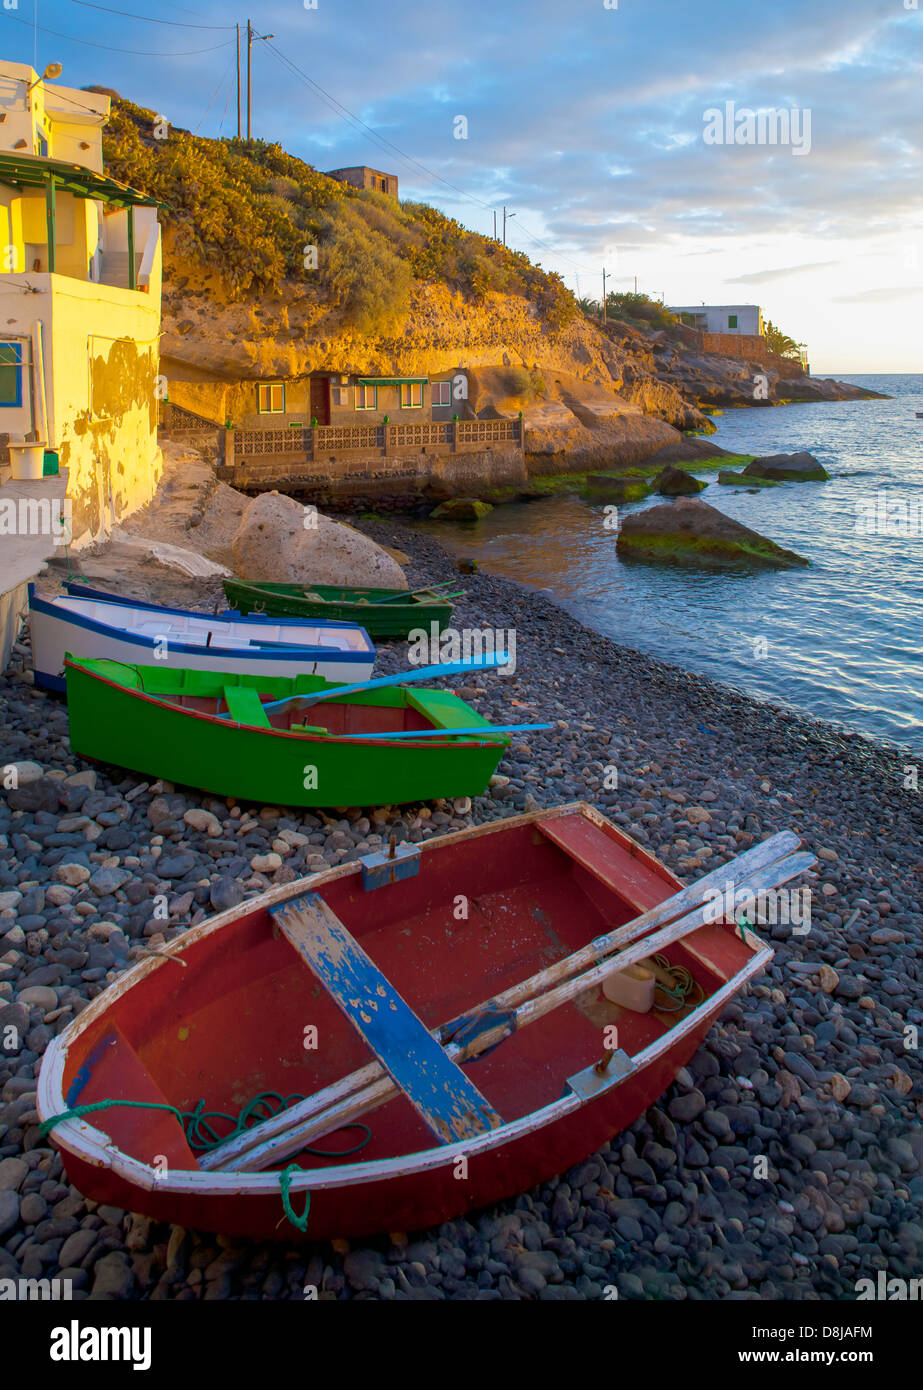 tenerife, seamens, boats, colored, country side, medeterranian Stock Photo